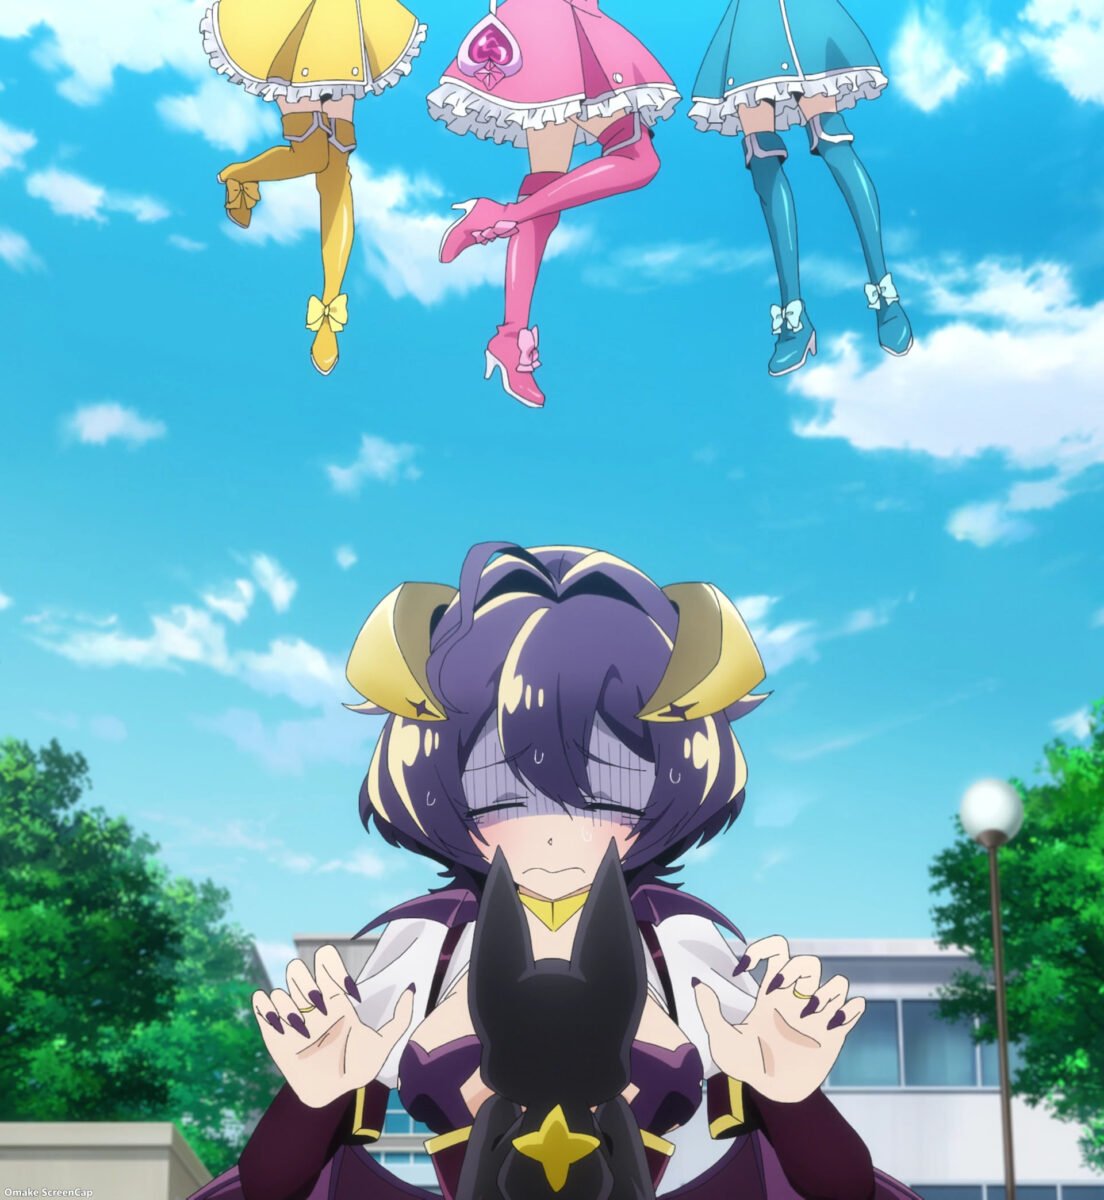 Gushing Over Magical Girls Episode 1 Tres Magia Finds Bad Guys